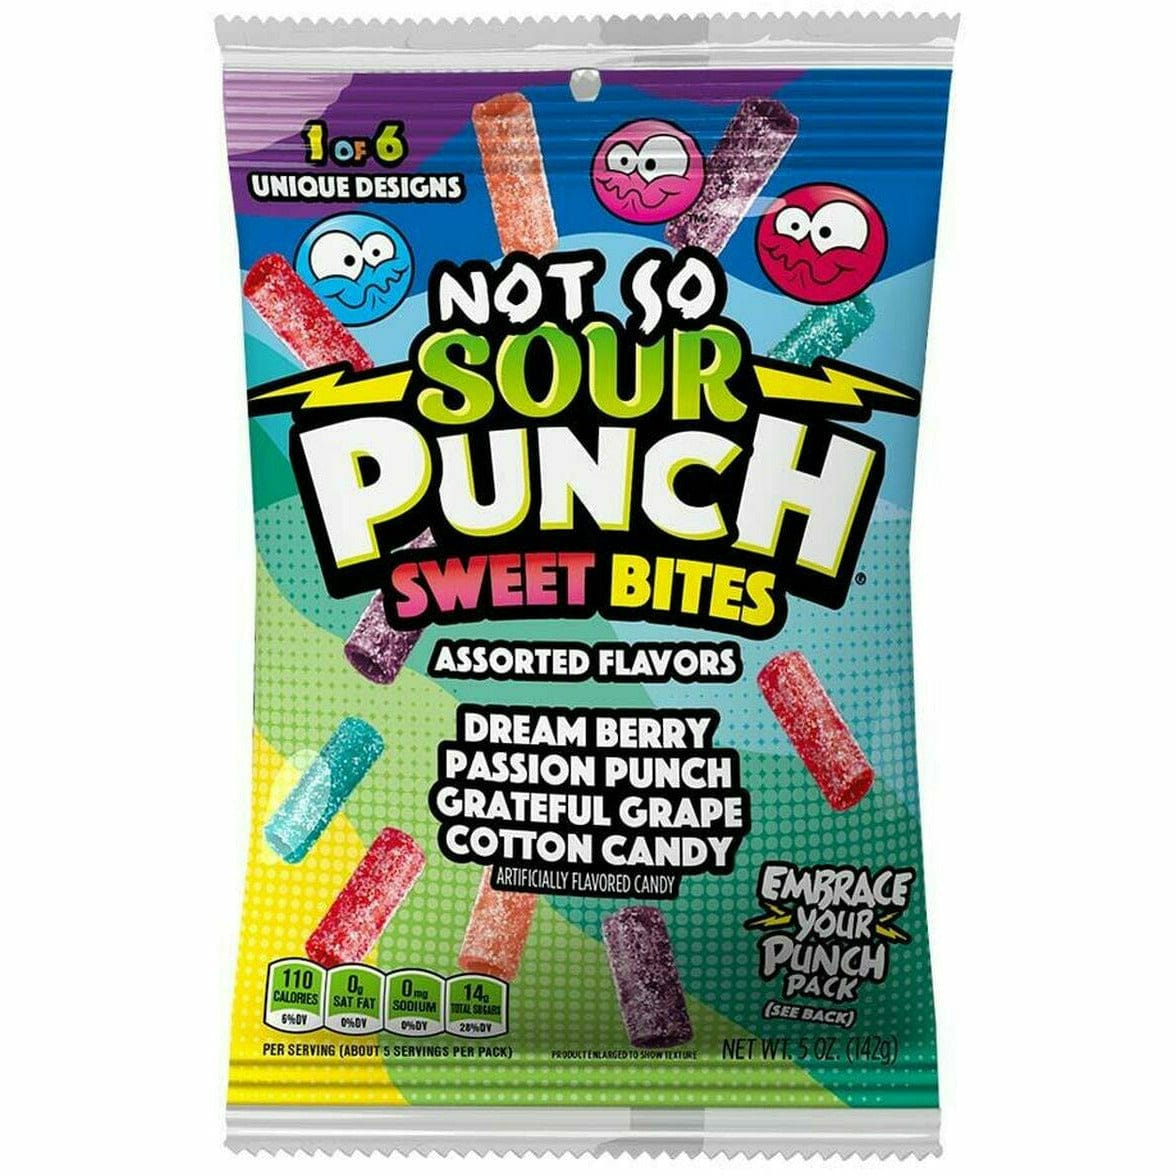 Redstone Foods Inc CANDY Sour Punch Bites - Not So Sour Sweet Bites